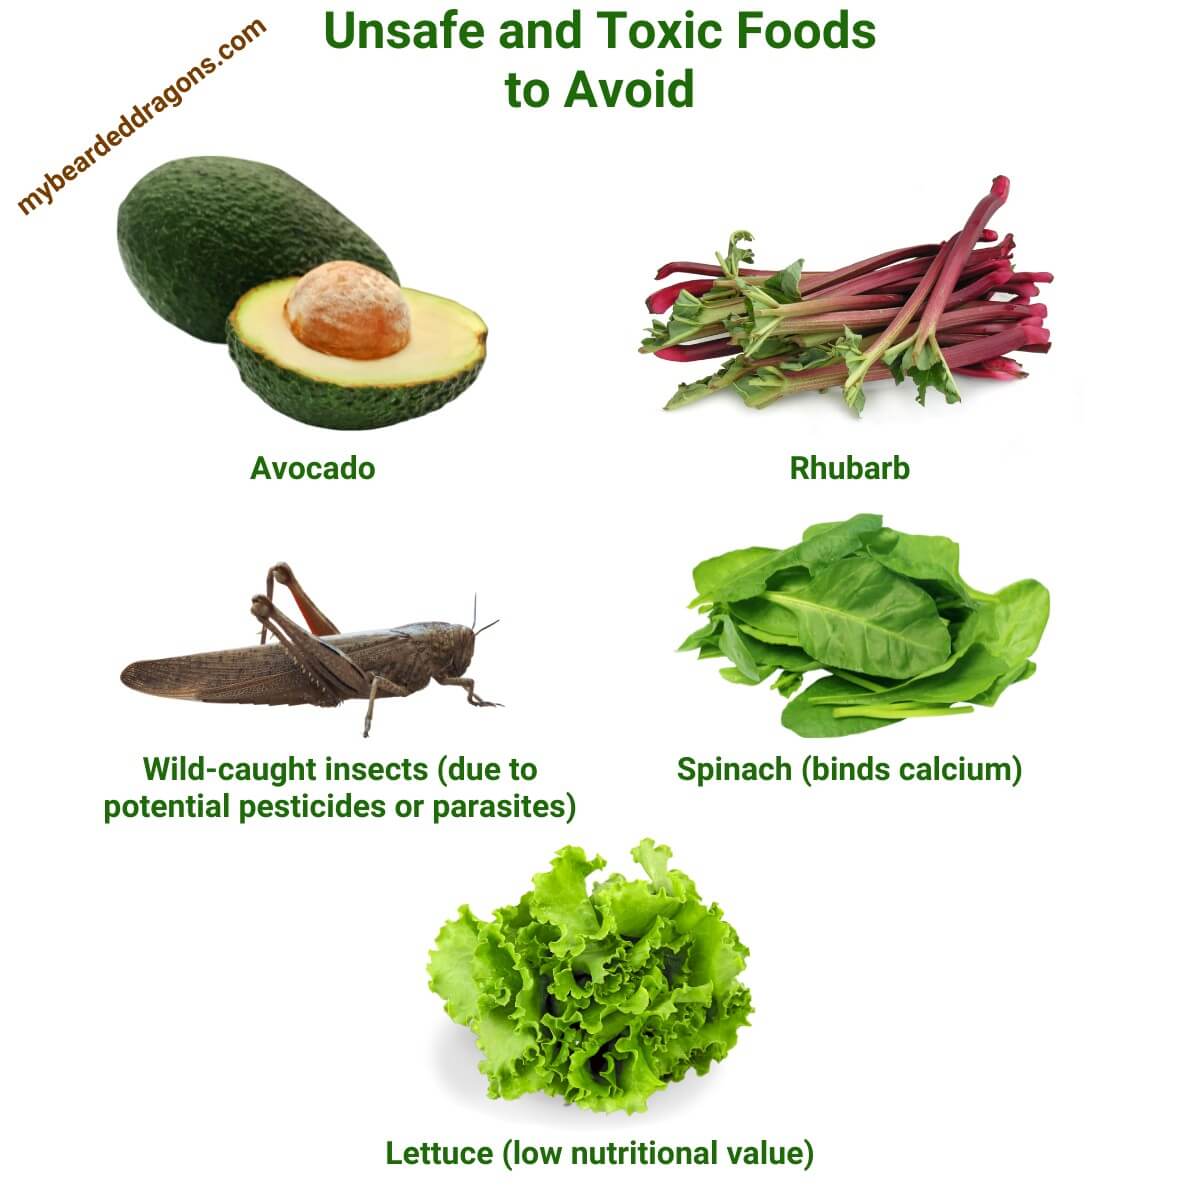 A visual list of unsafe and toxic foods for bearded dragons, including avocado, rhubarb, wild-caught insects, spinach, and lettuce.